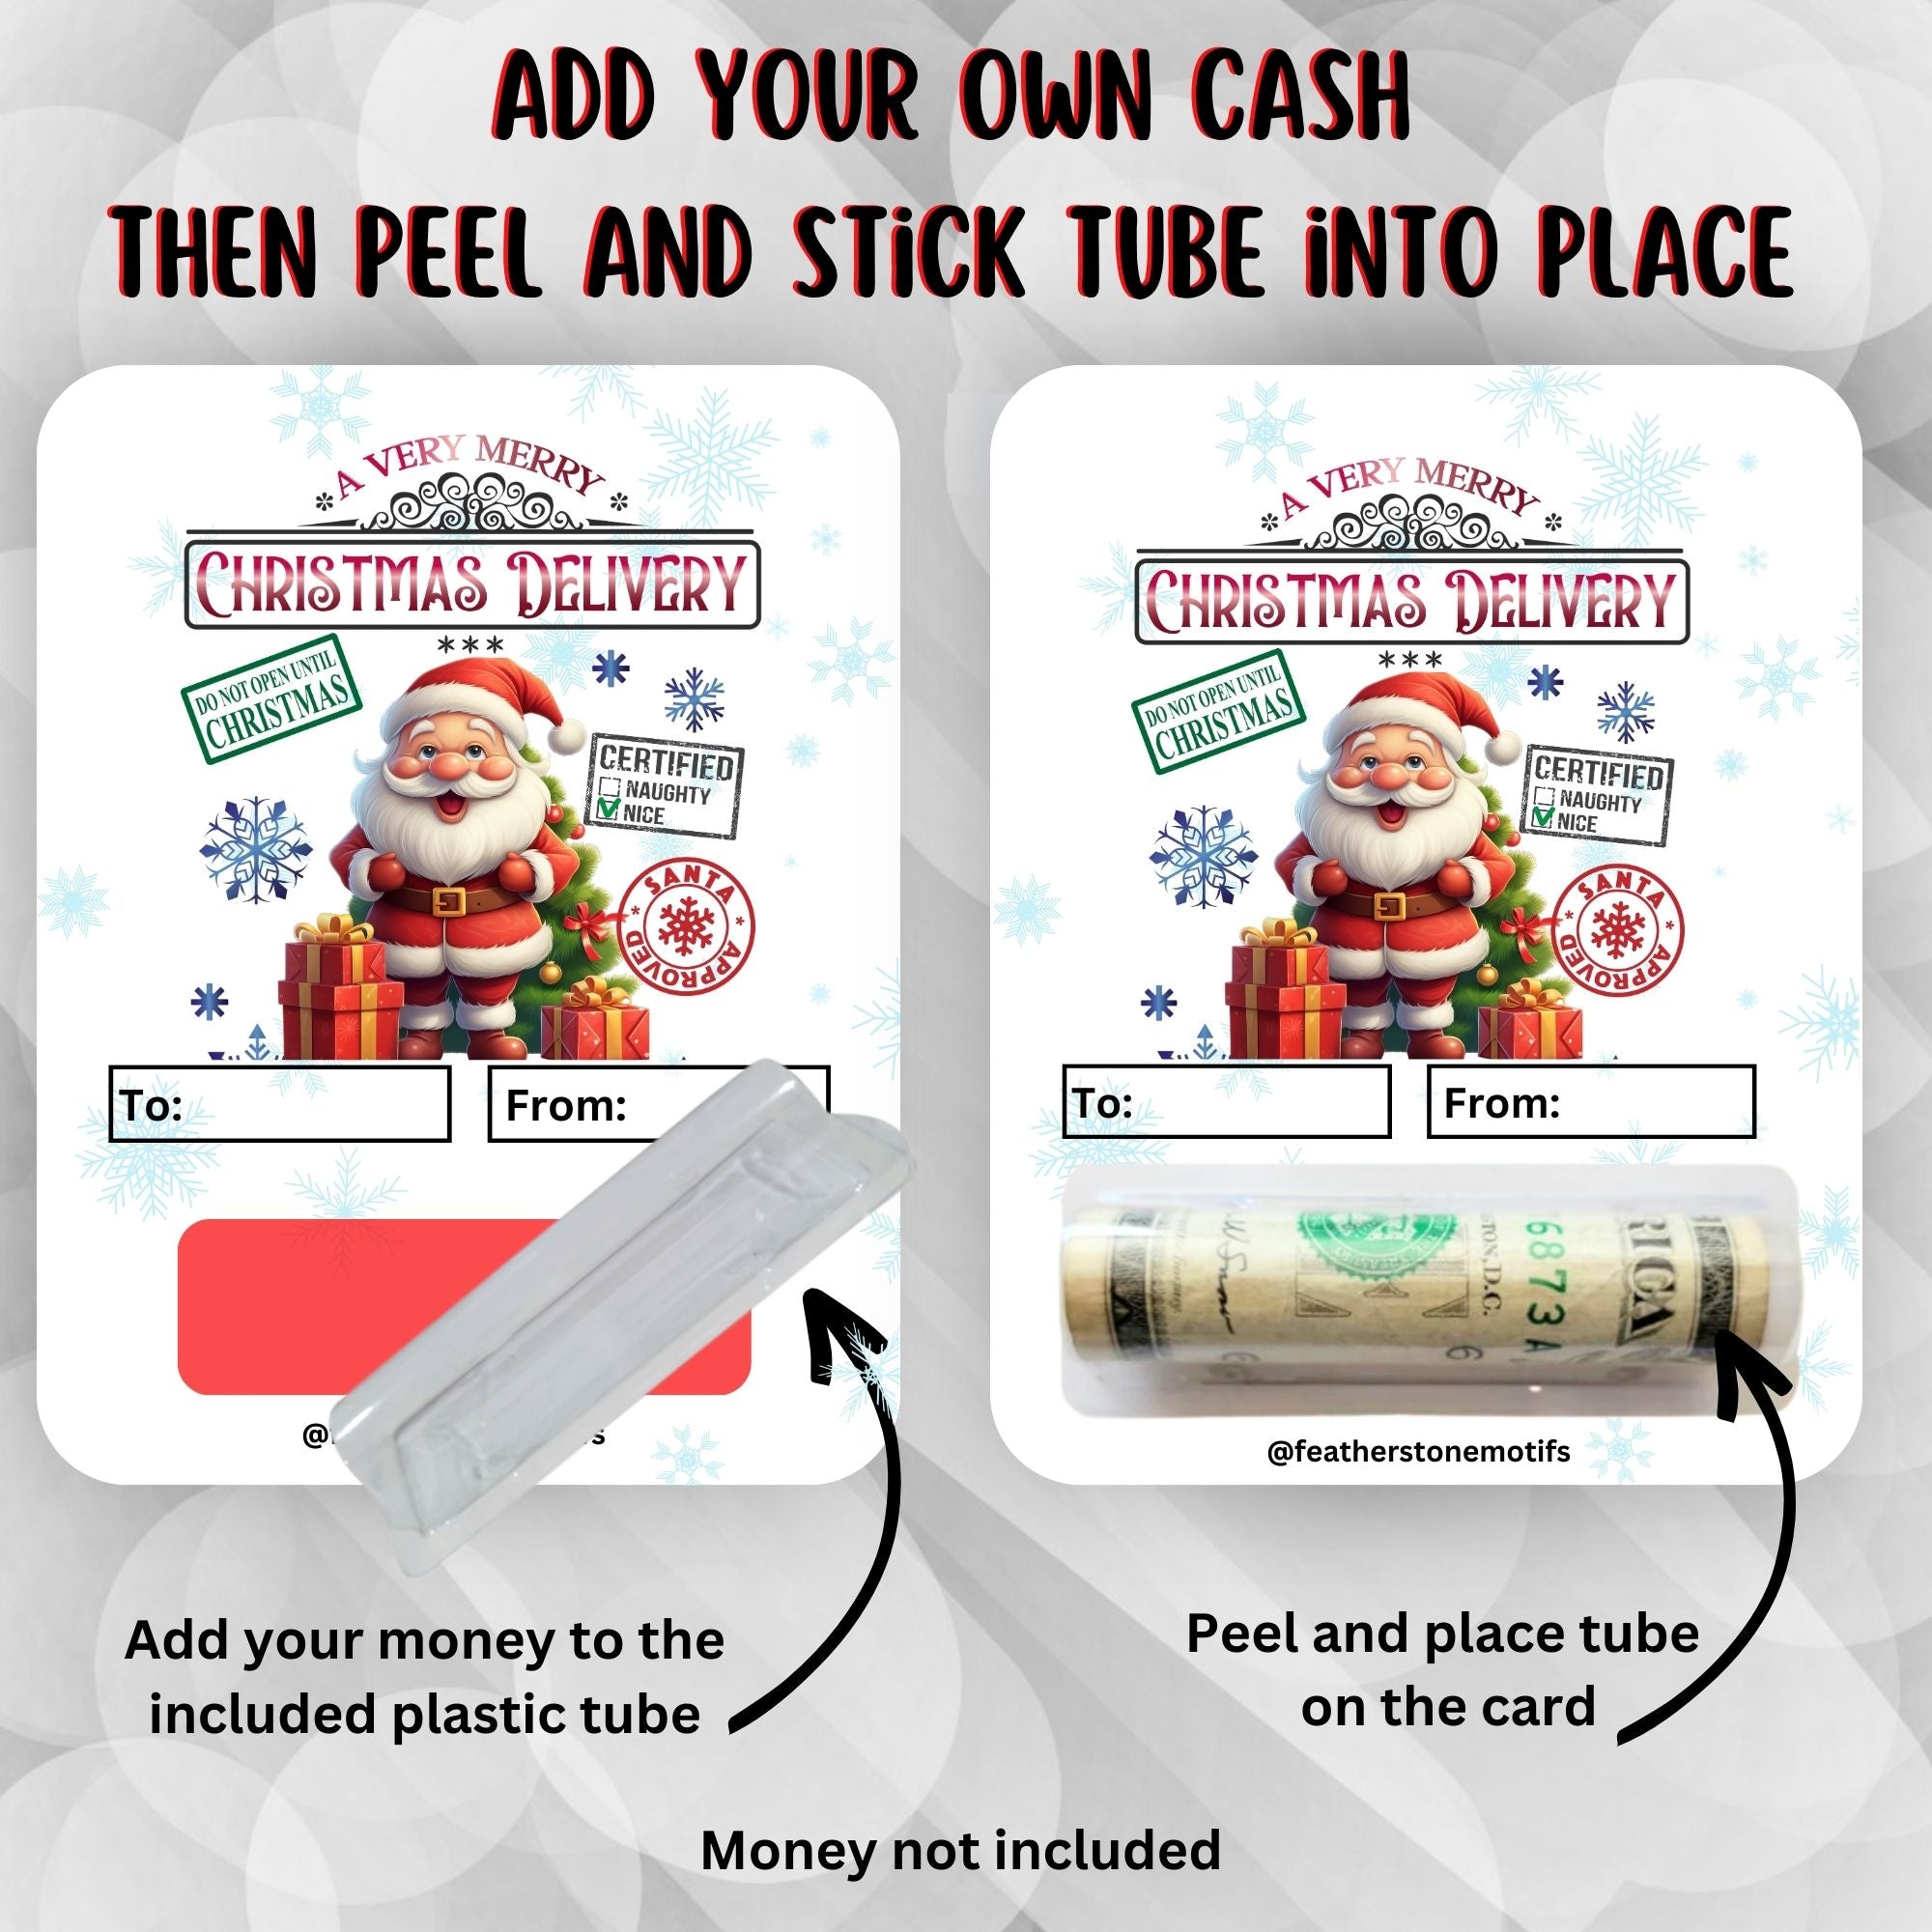 This image shows how to attach the money tube to the Christmas Delivery Money Card.